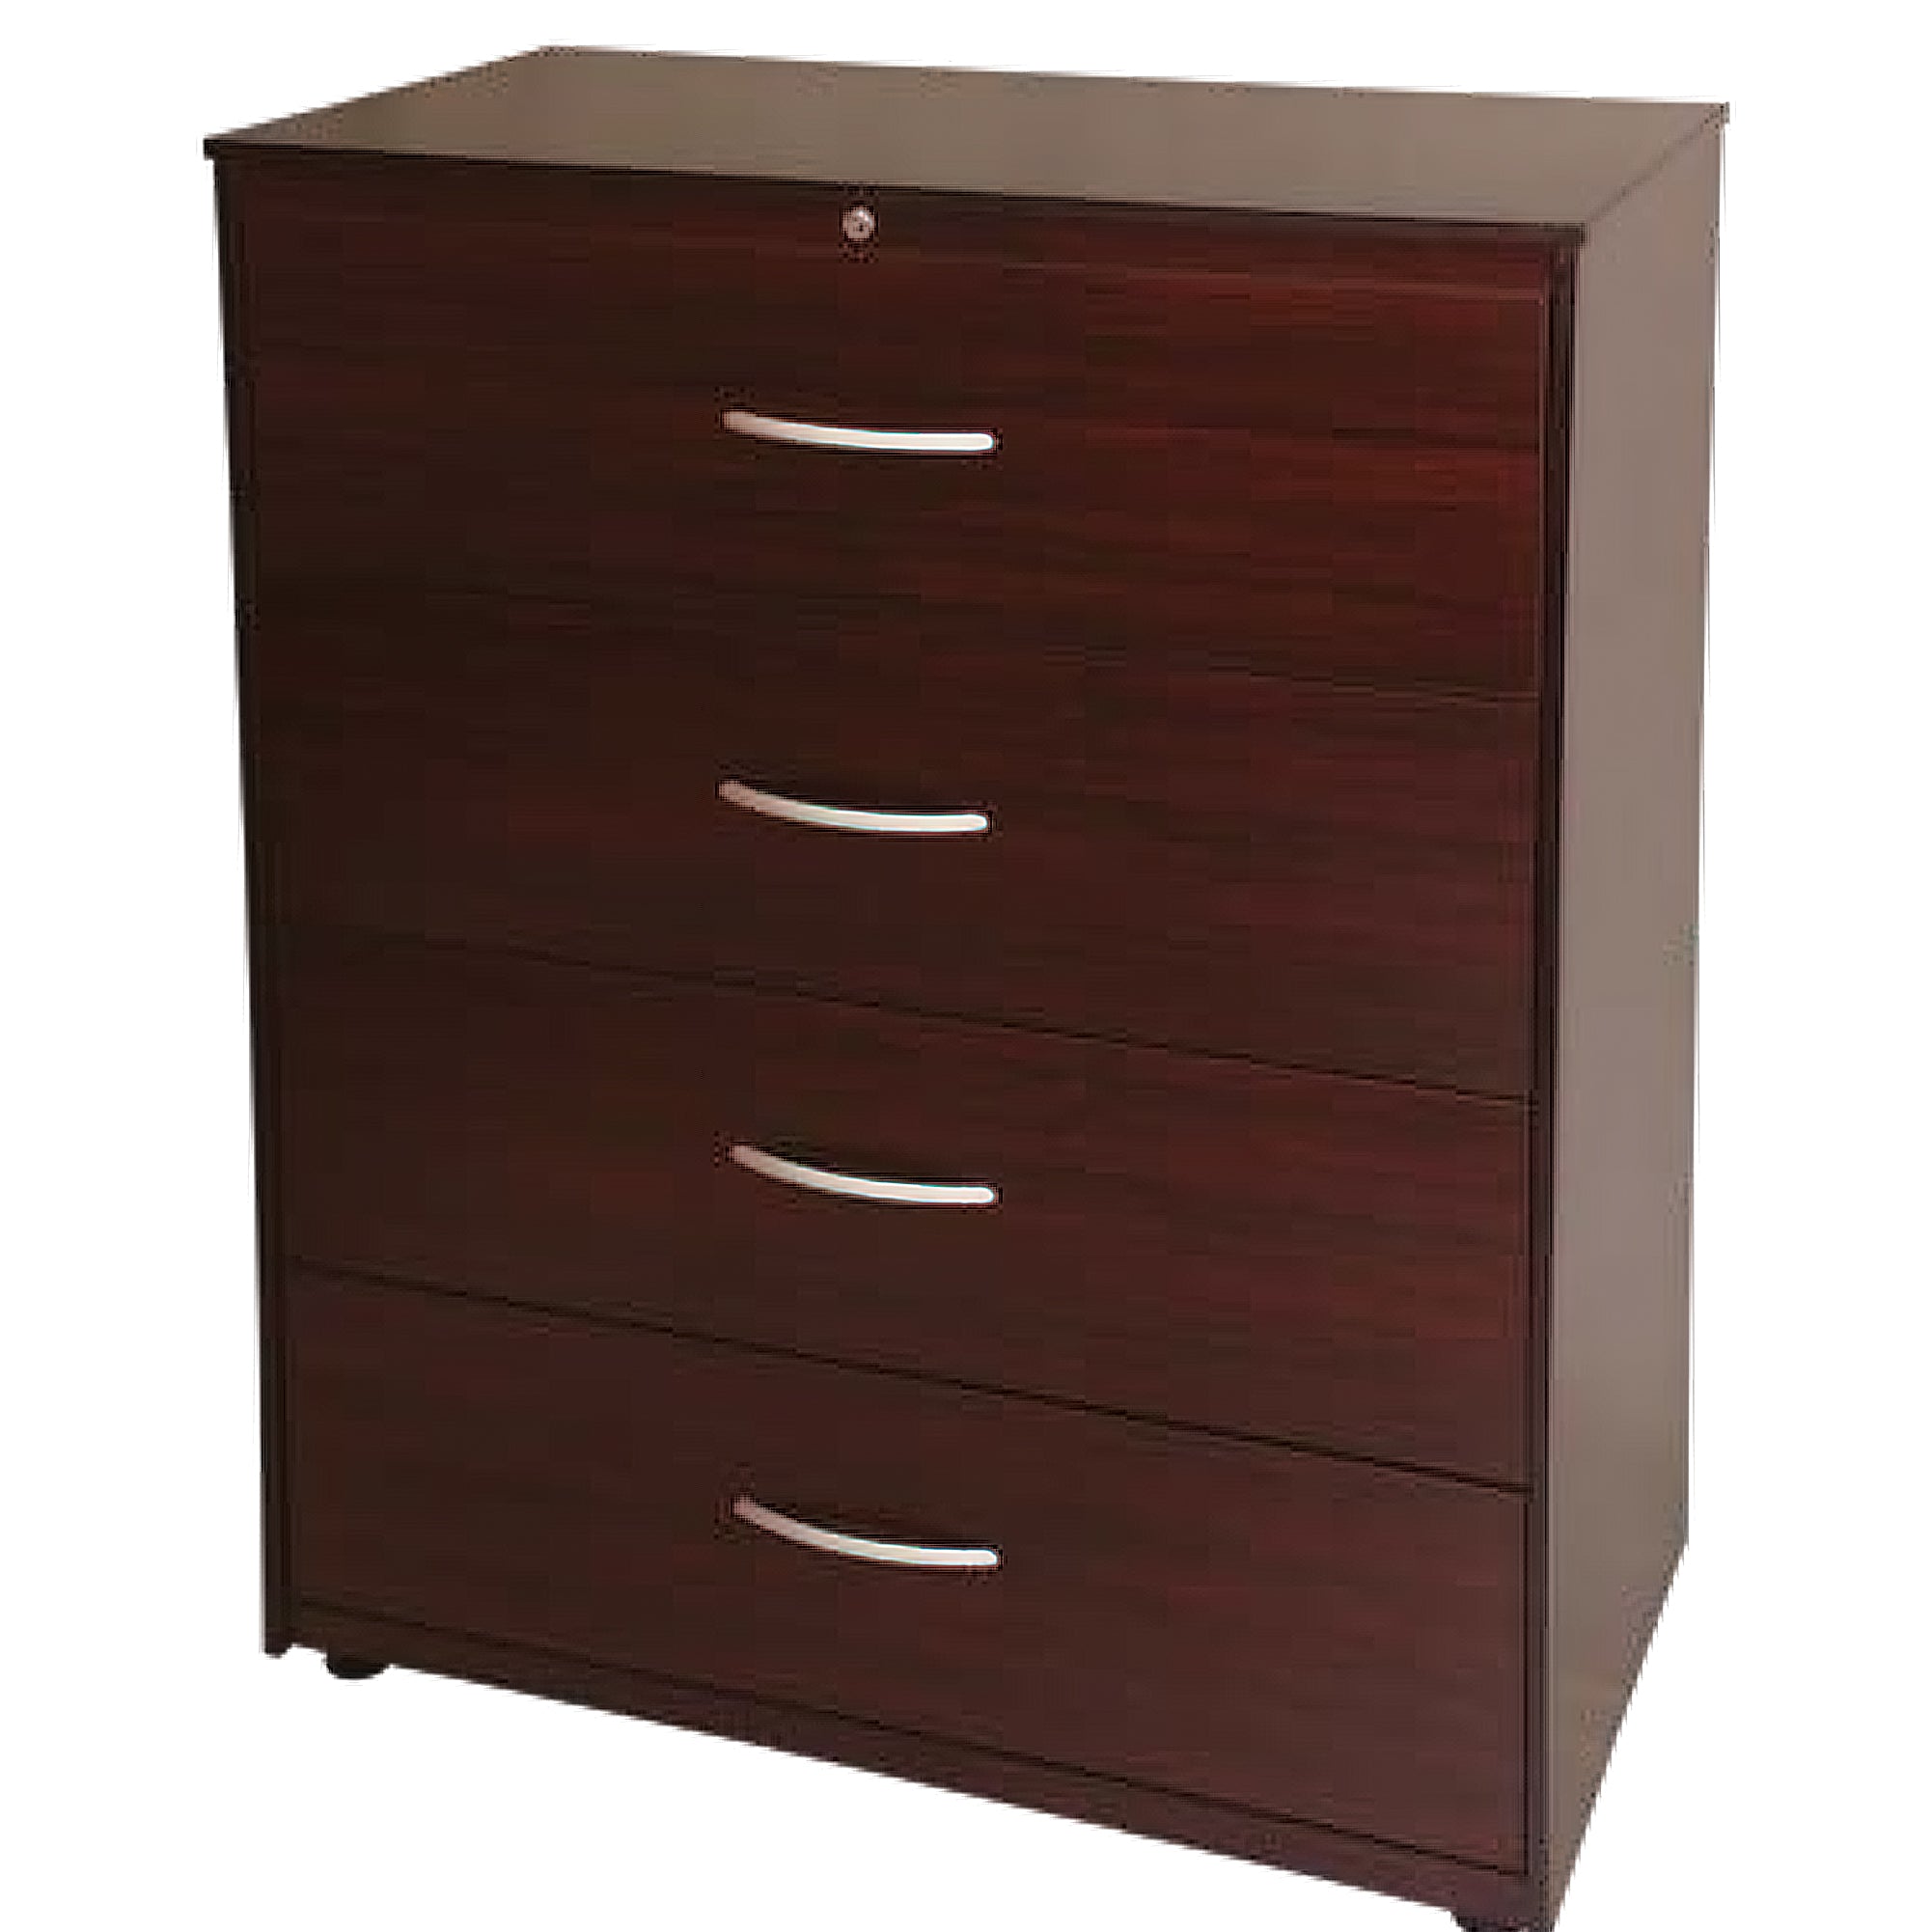 Combination / Lever Arch Cabinet